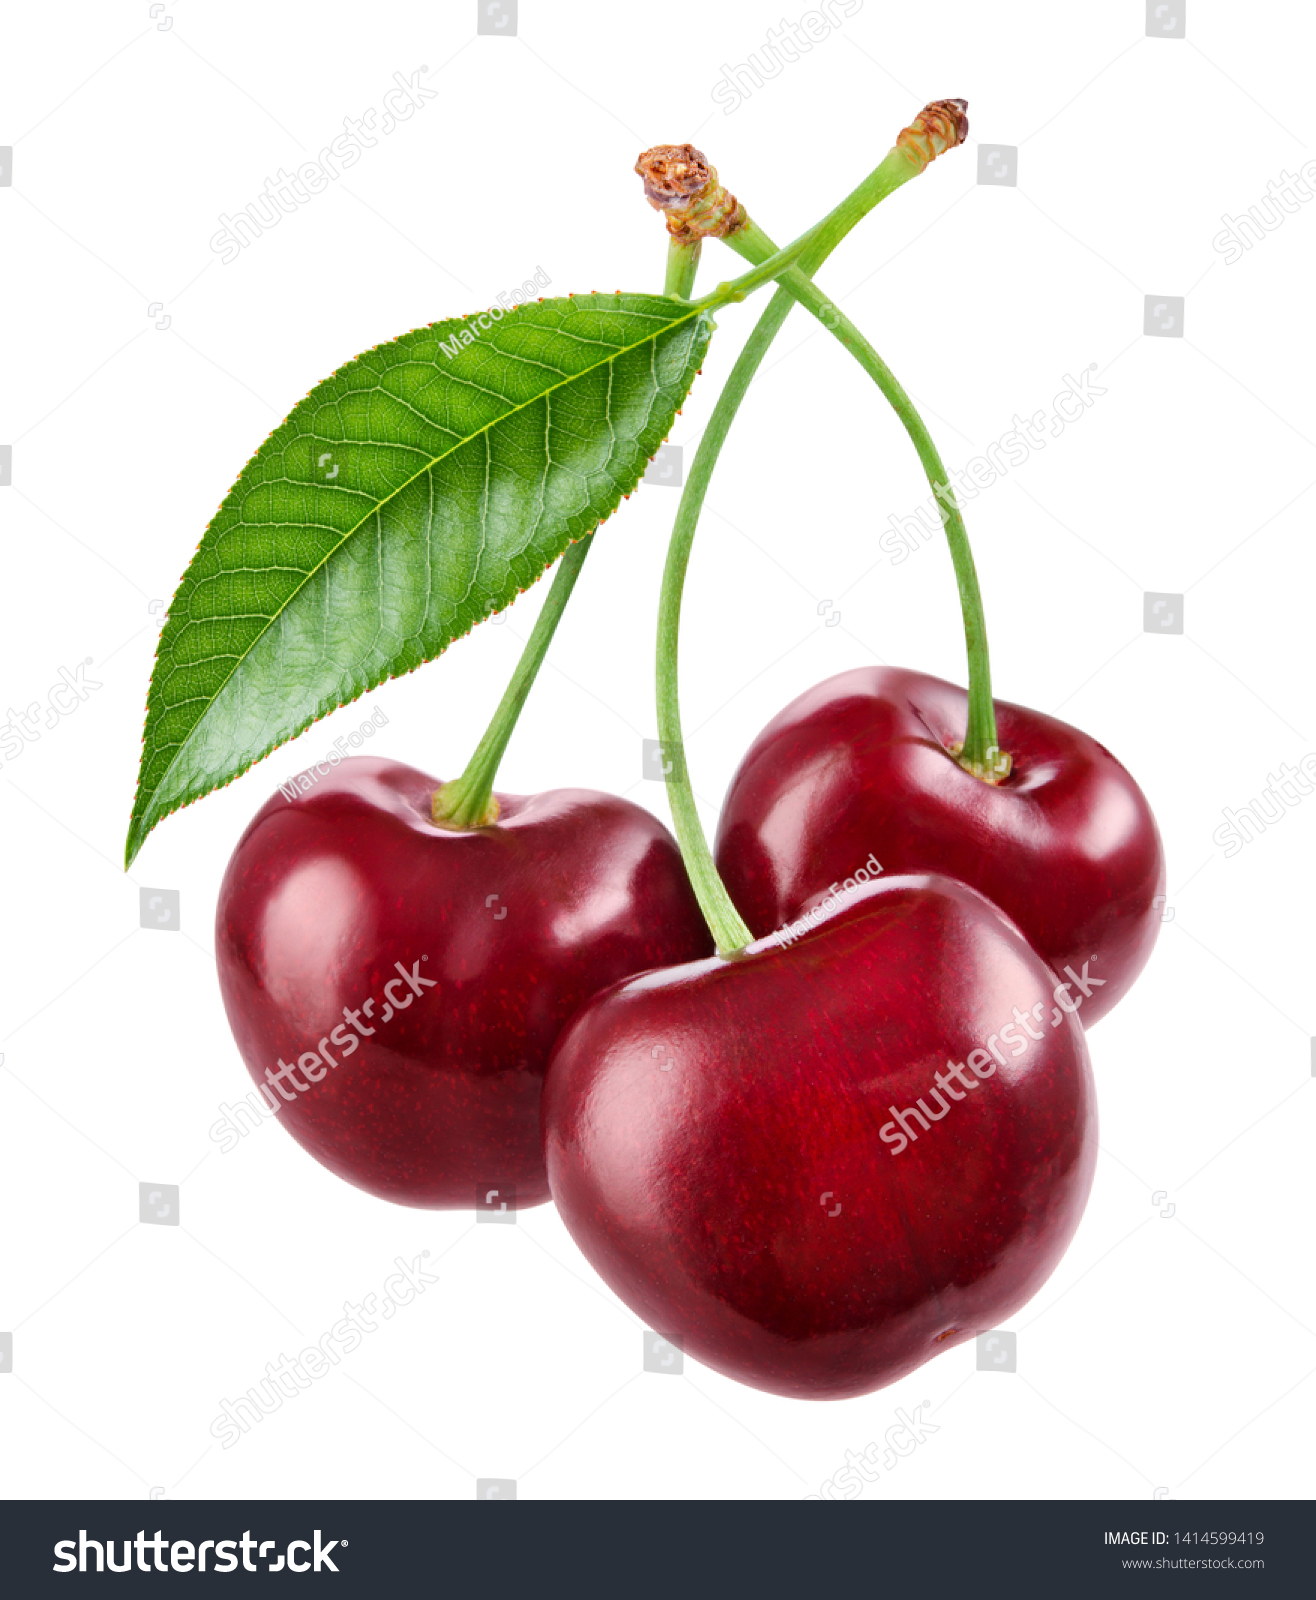 Cherry isolated. Cherries on white. Cherries with leaf. With clipping path. #1414599419